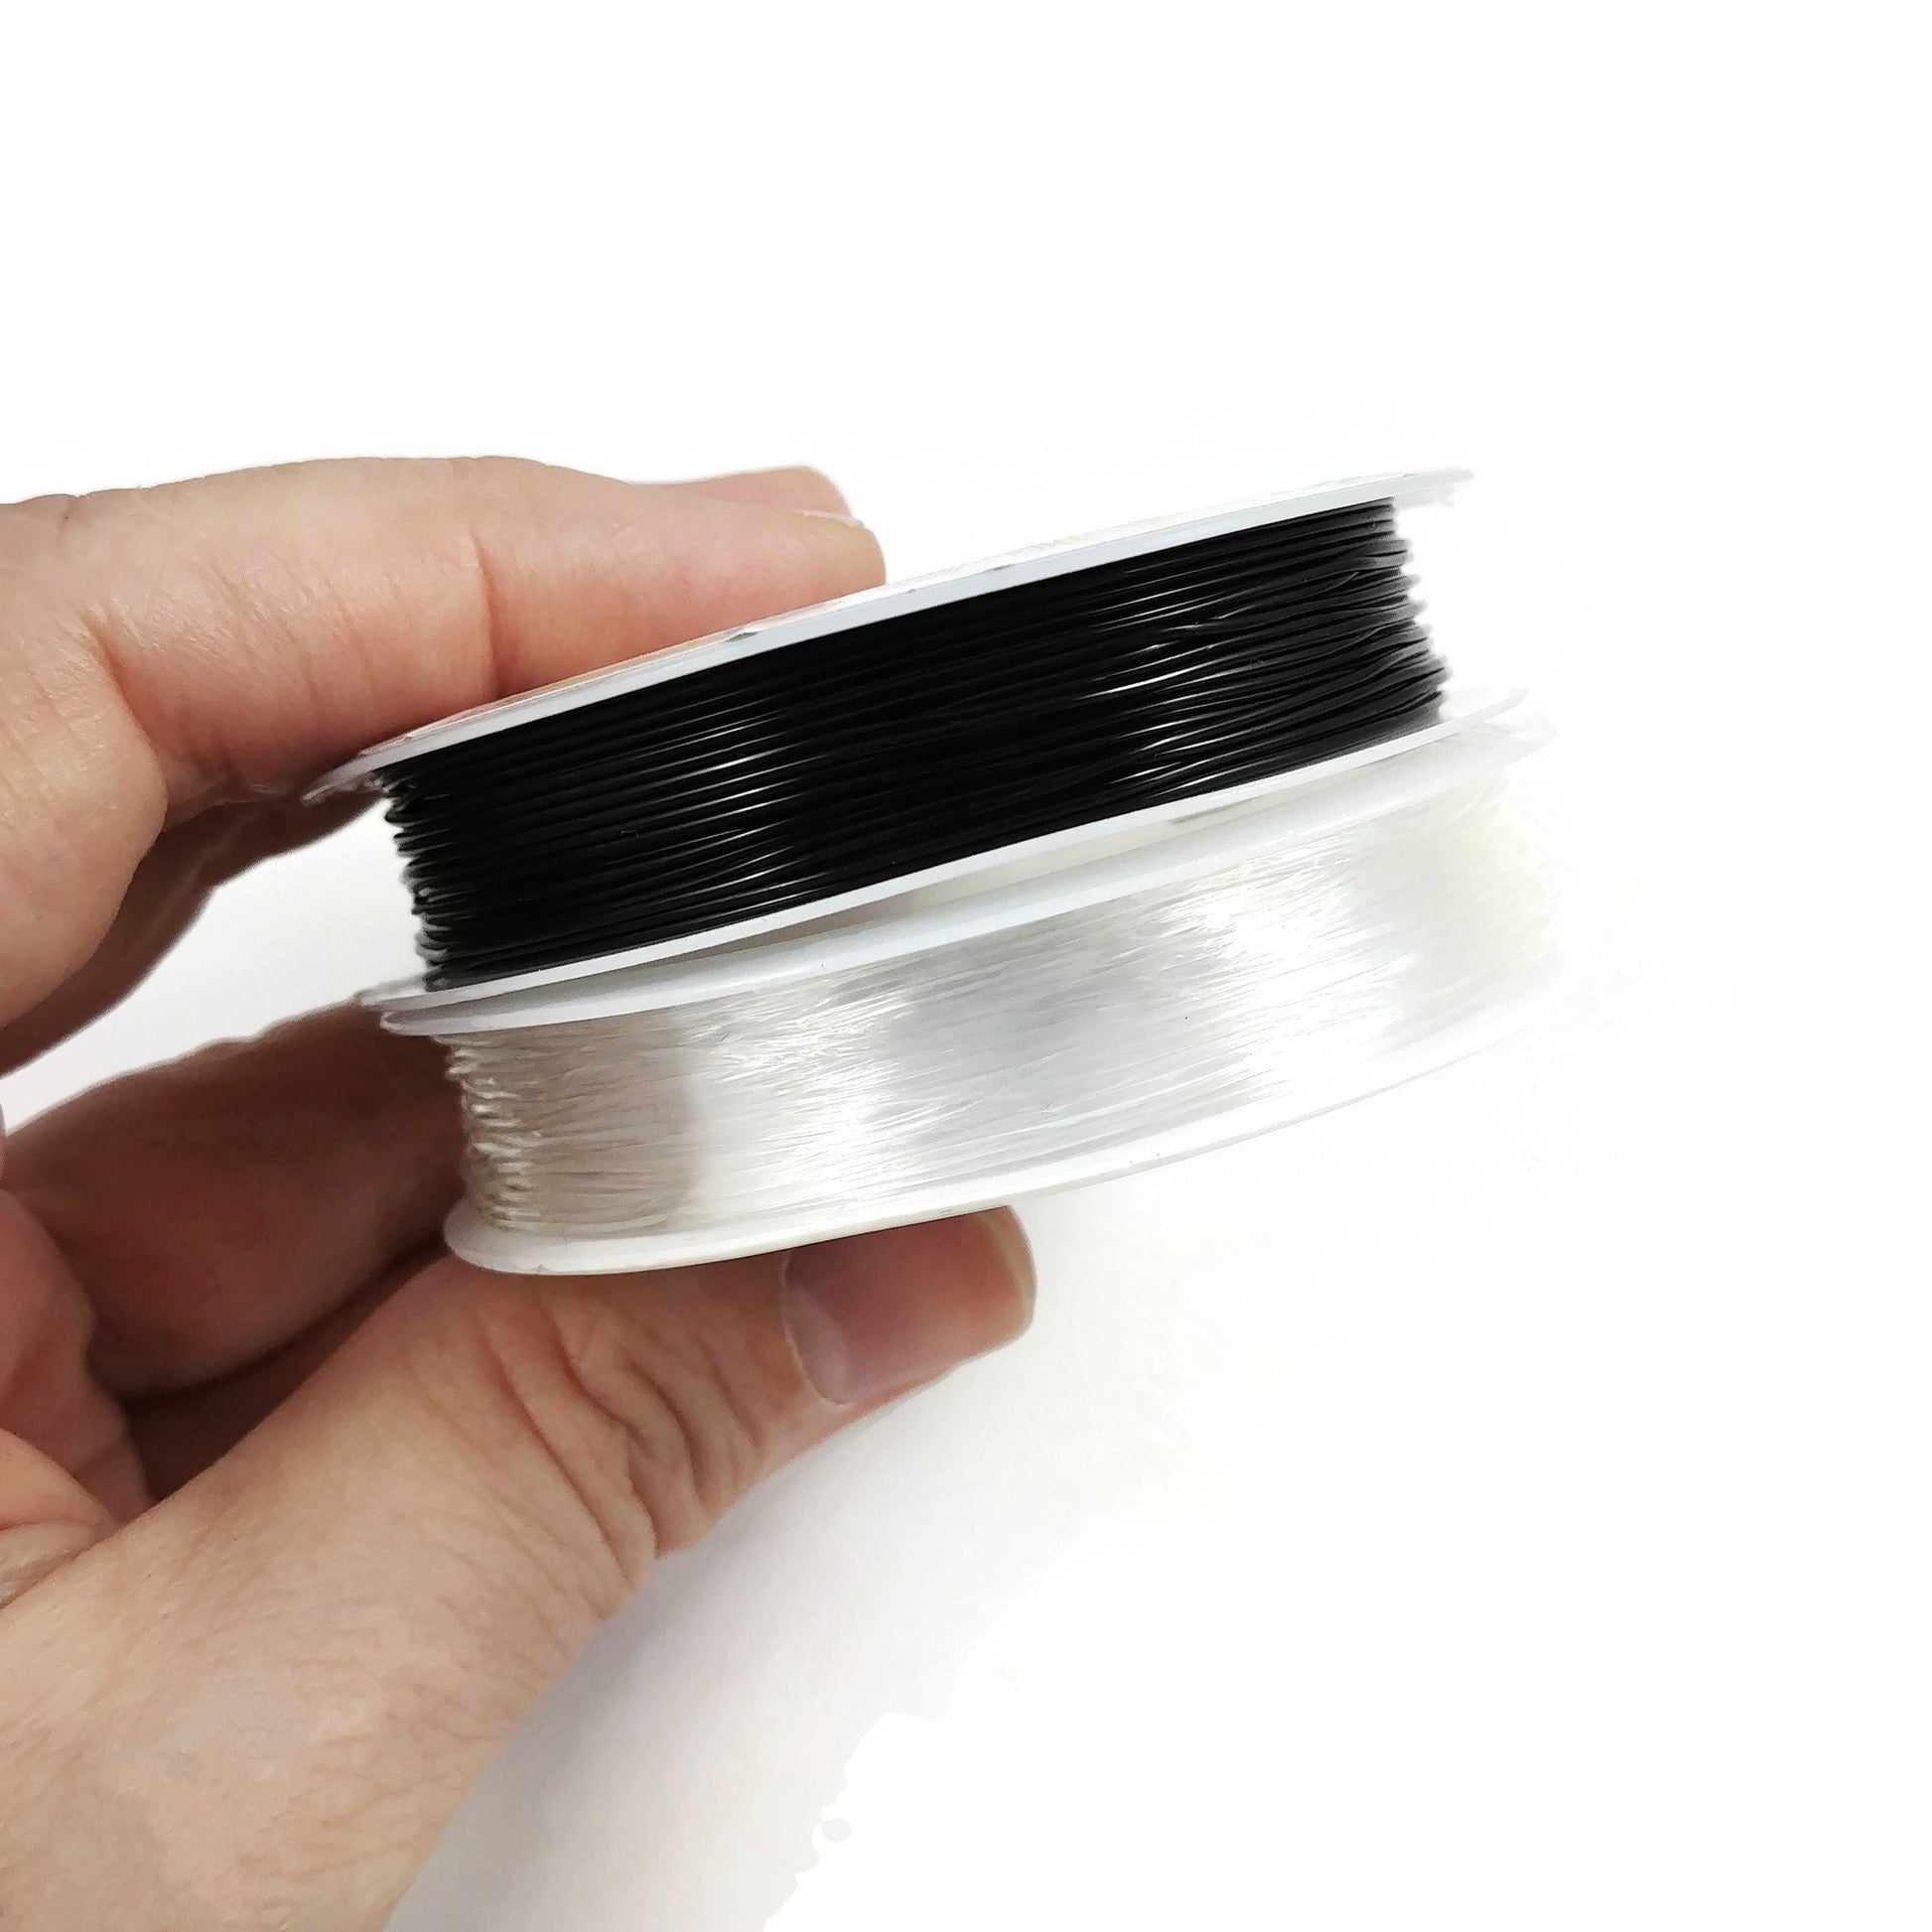 Elastic stretch cord, Stretchy string for bracelets, Clear and black